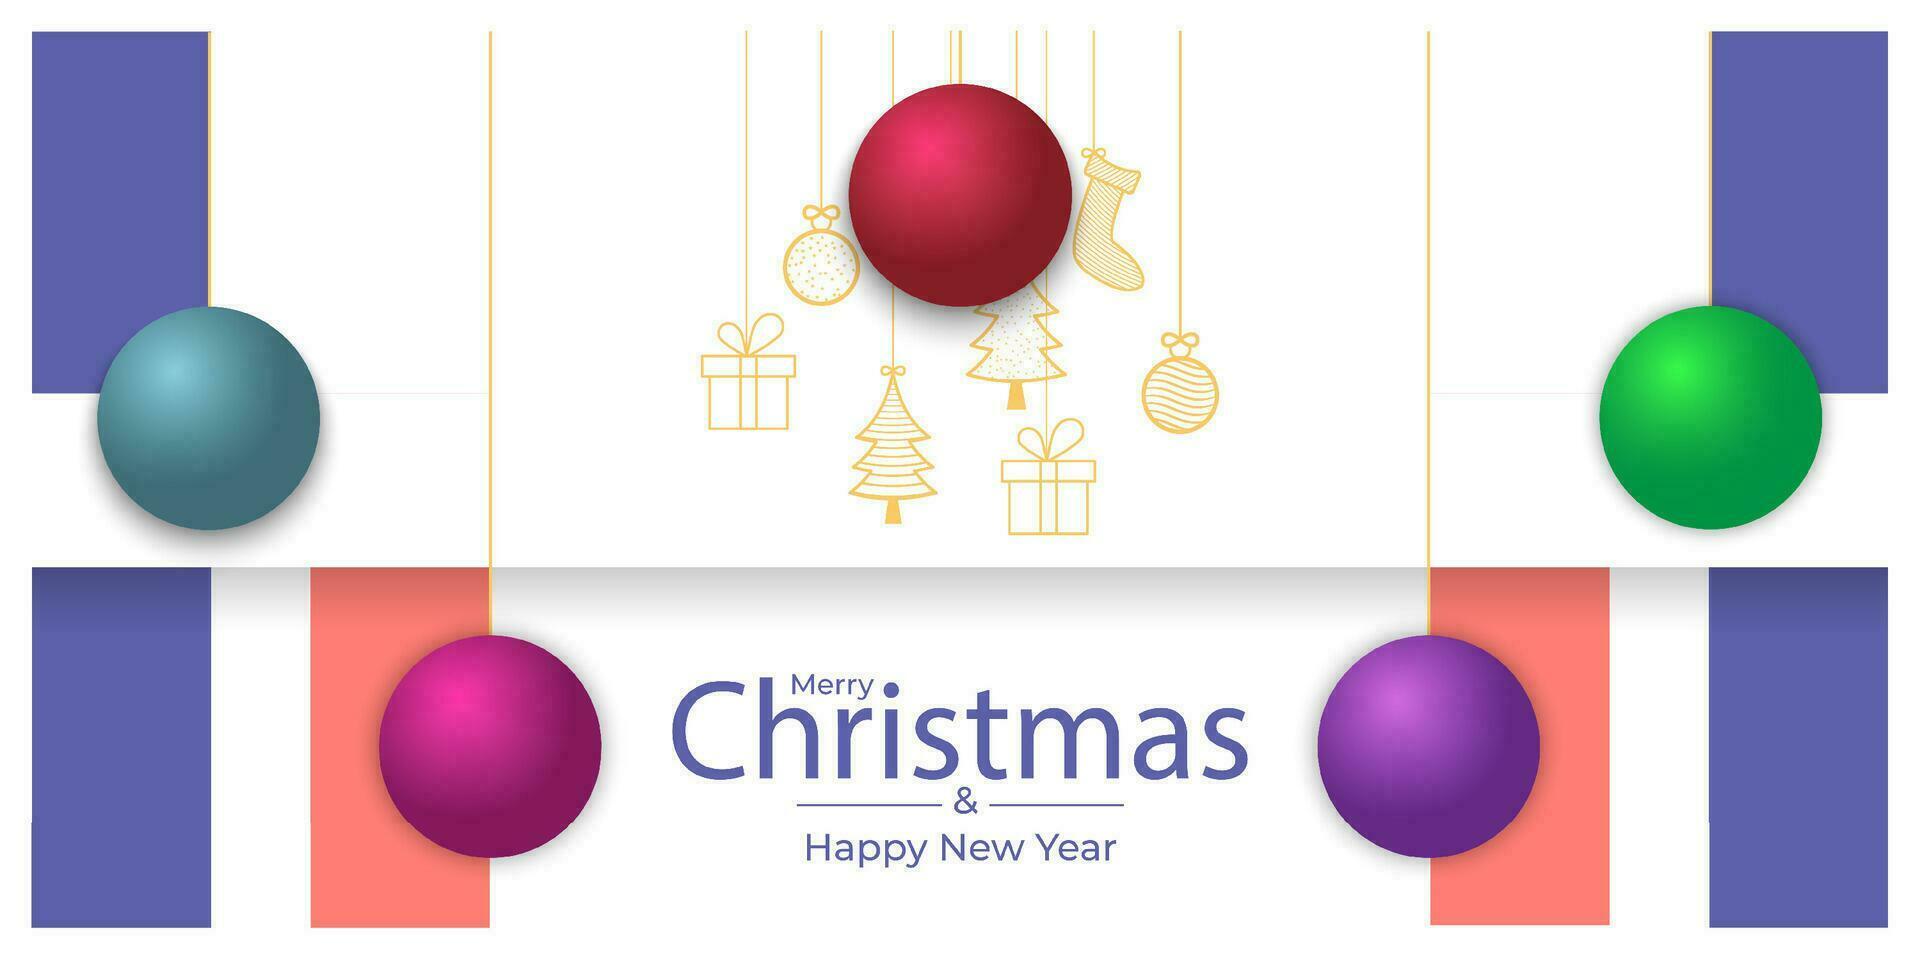 christmas banner background designs vector